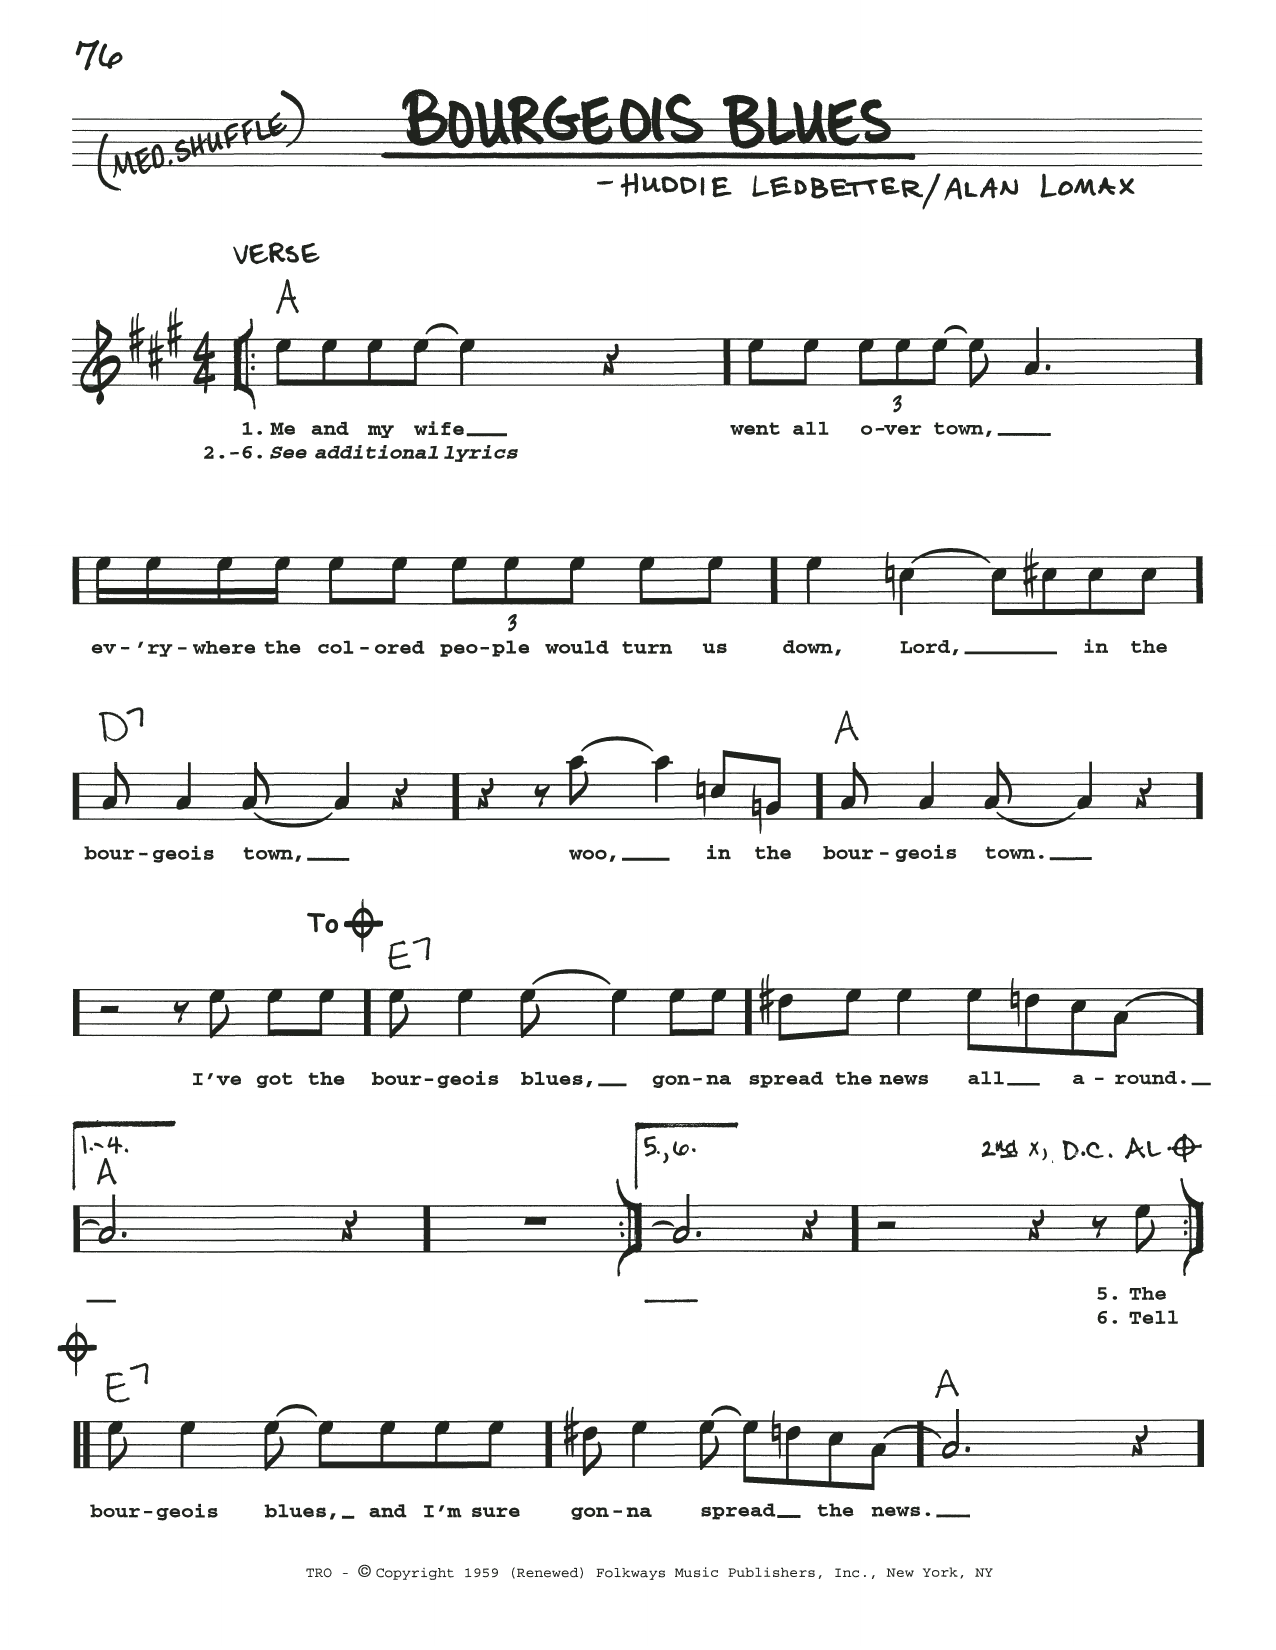 Download Lead Belly Bourgeois Blues Sheet Music